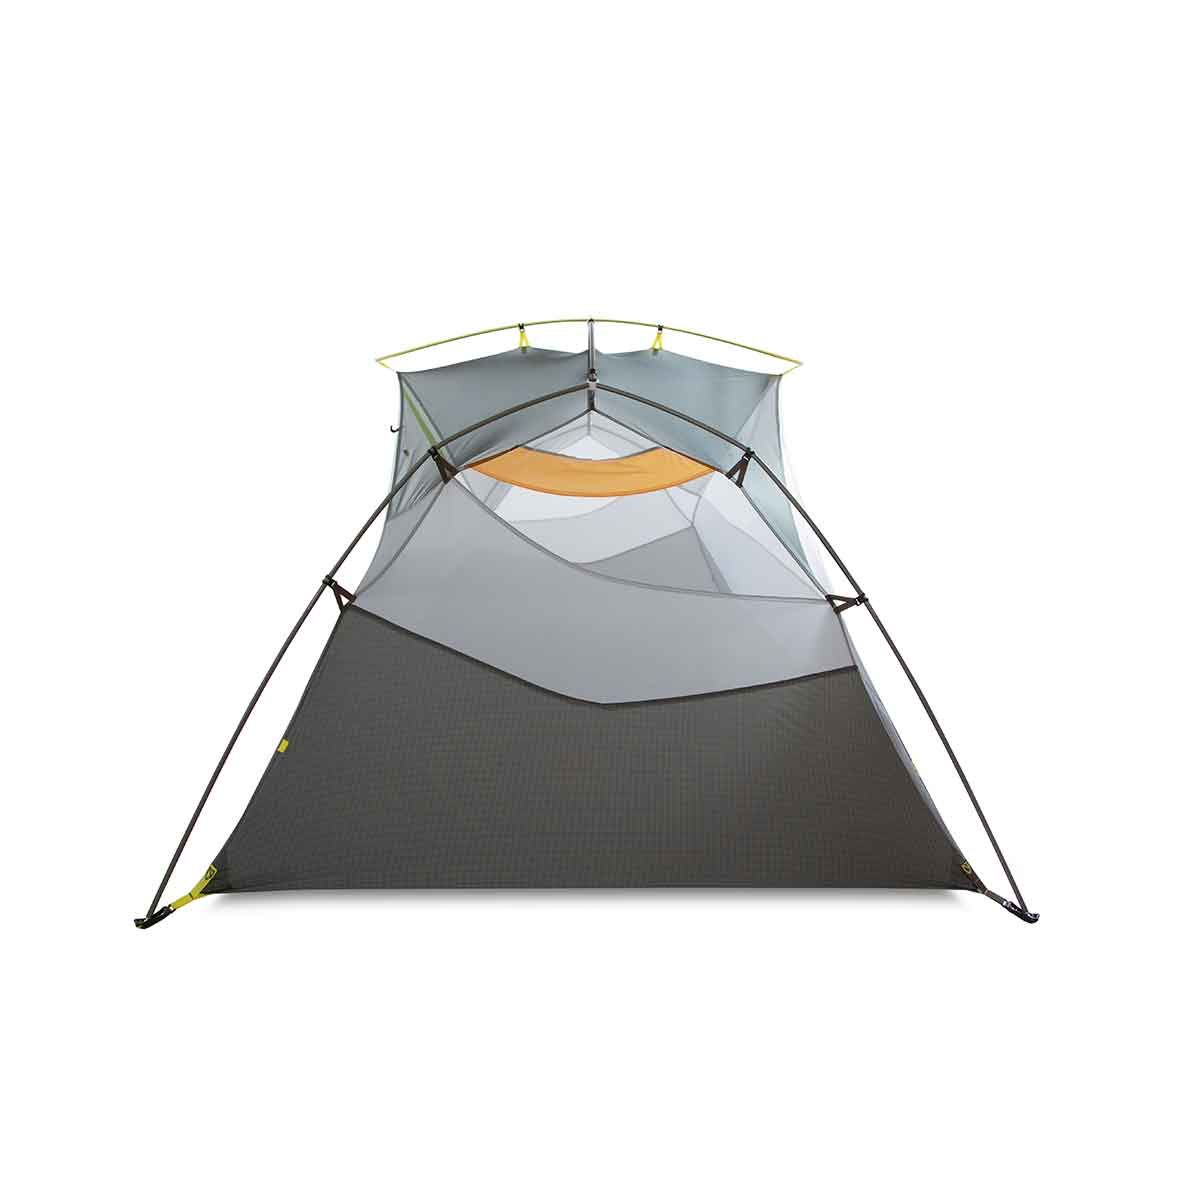 Dagger OSMO Tent 2 people